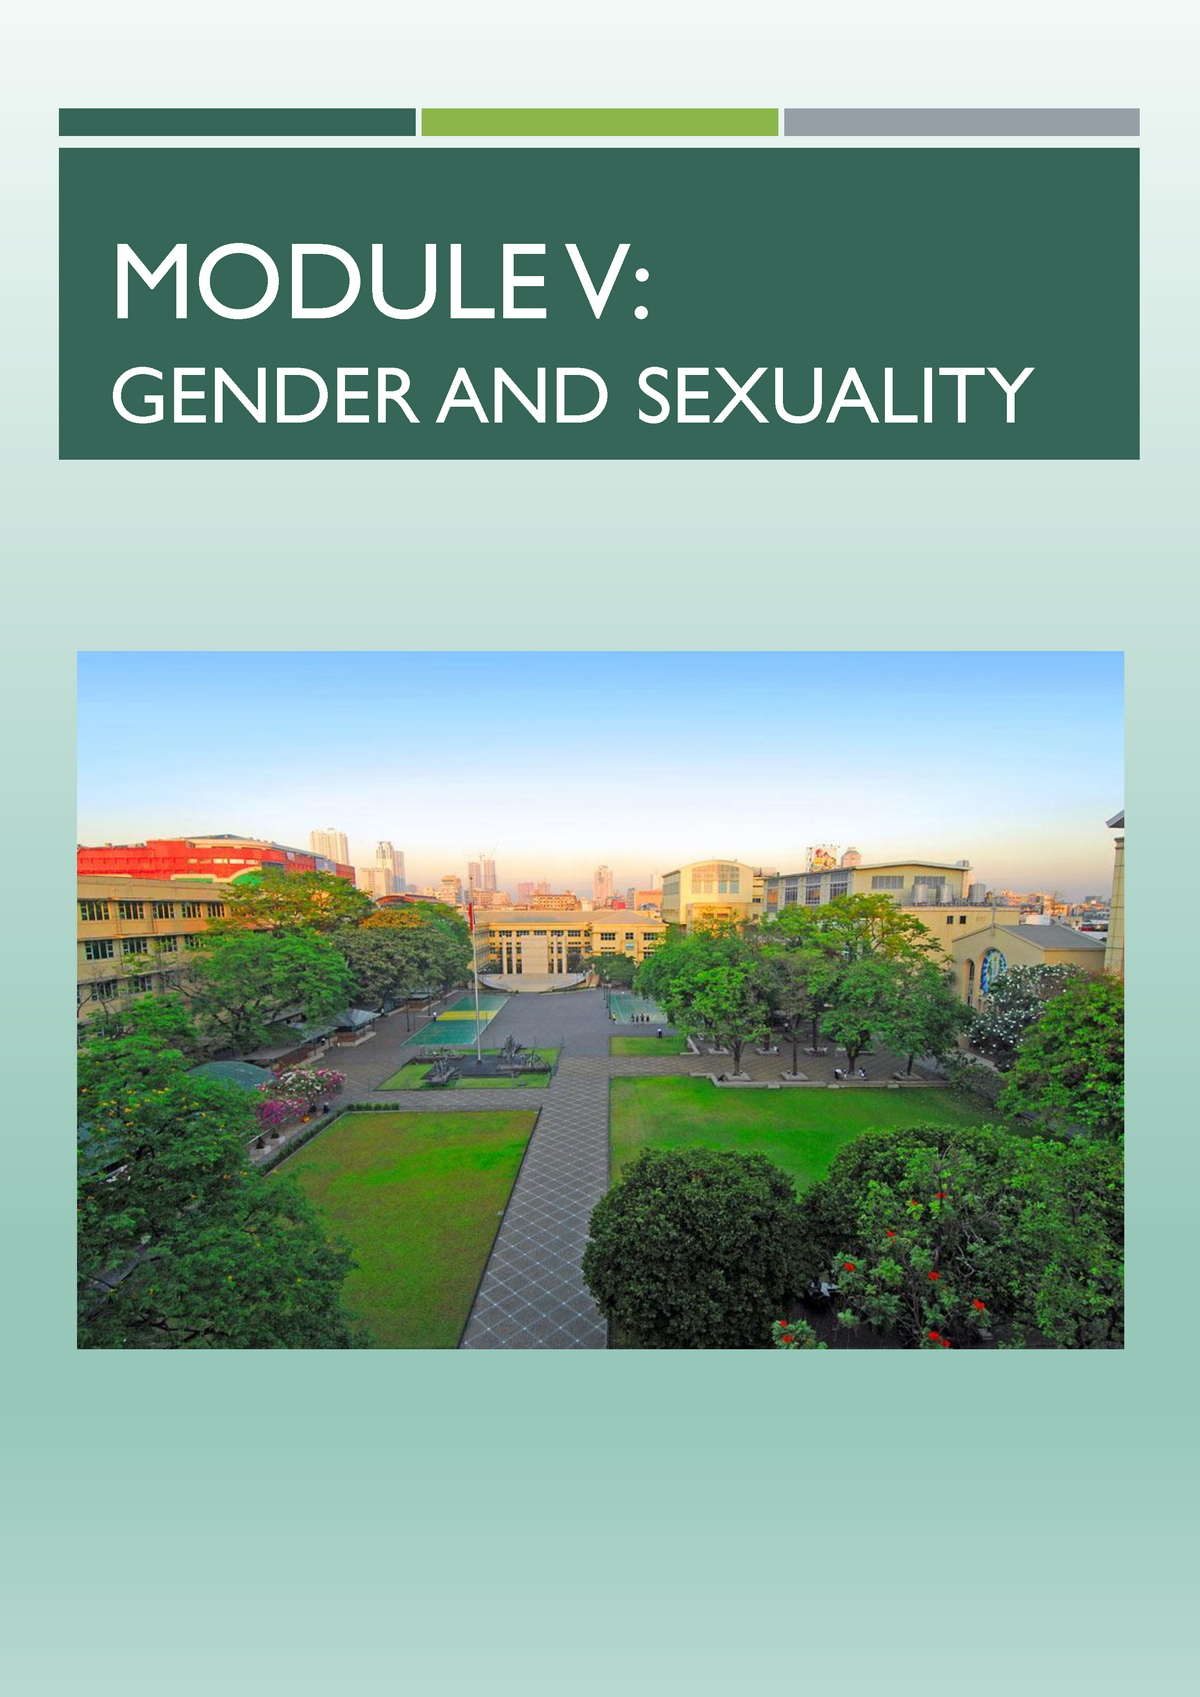 Module 5 Gender And The Sex Module V Gender And Sexuality Module V Gender And Sexuality 9857